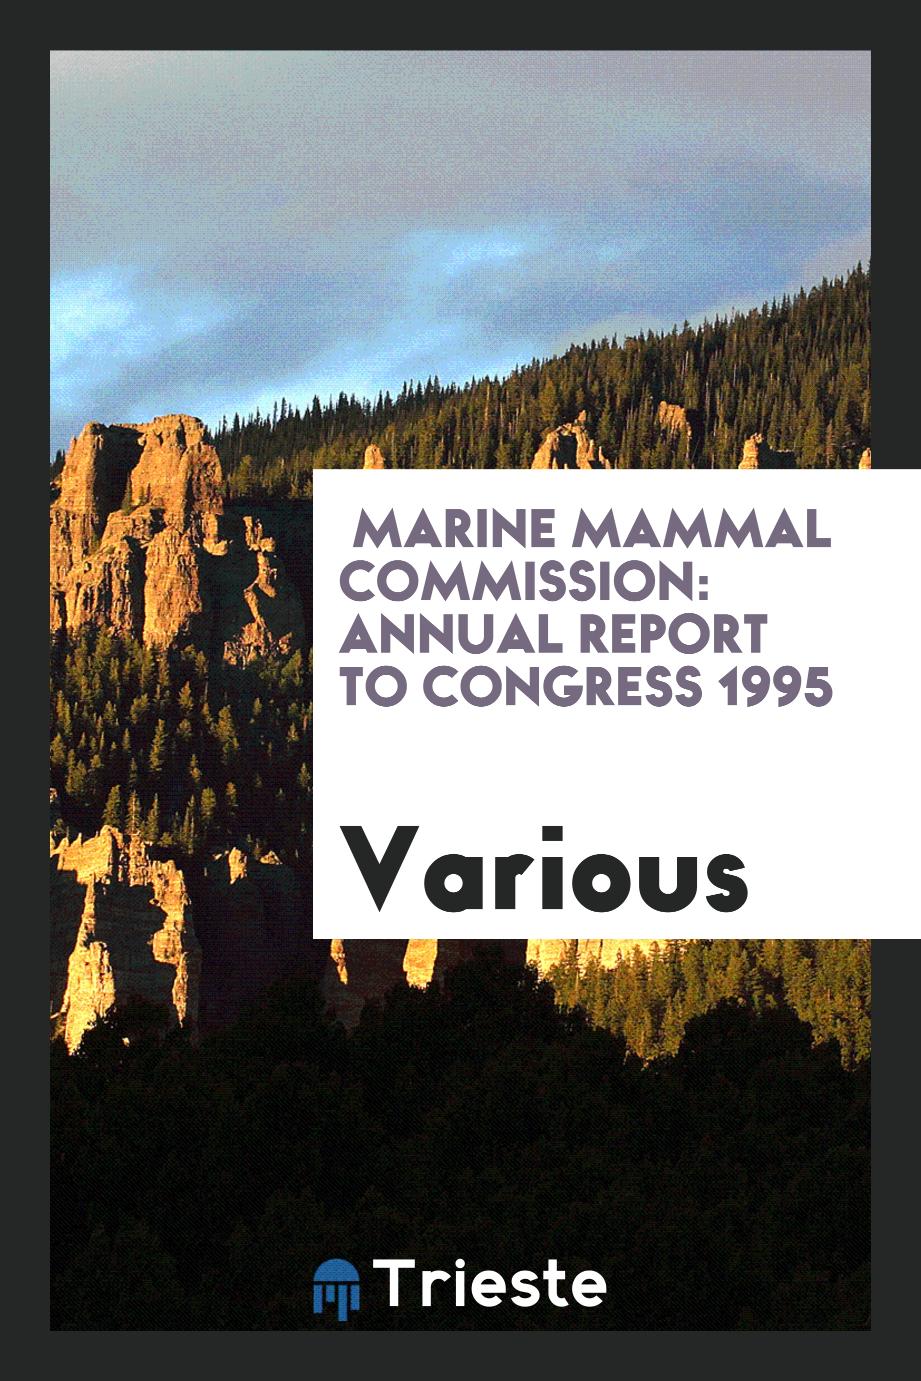 Marine Mammal Commission: annual report to Congress 1995